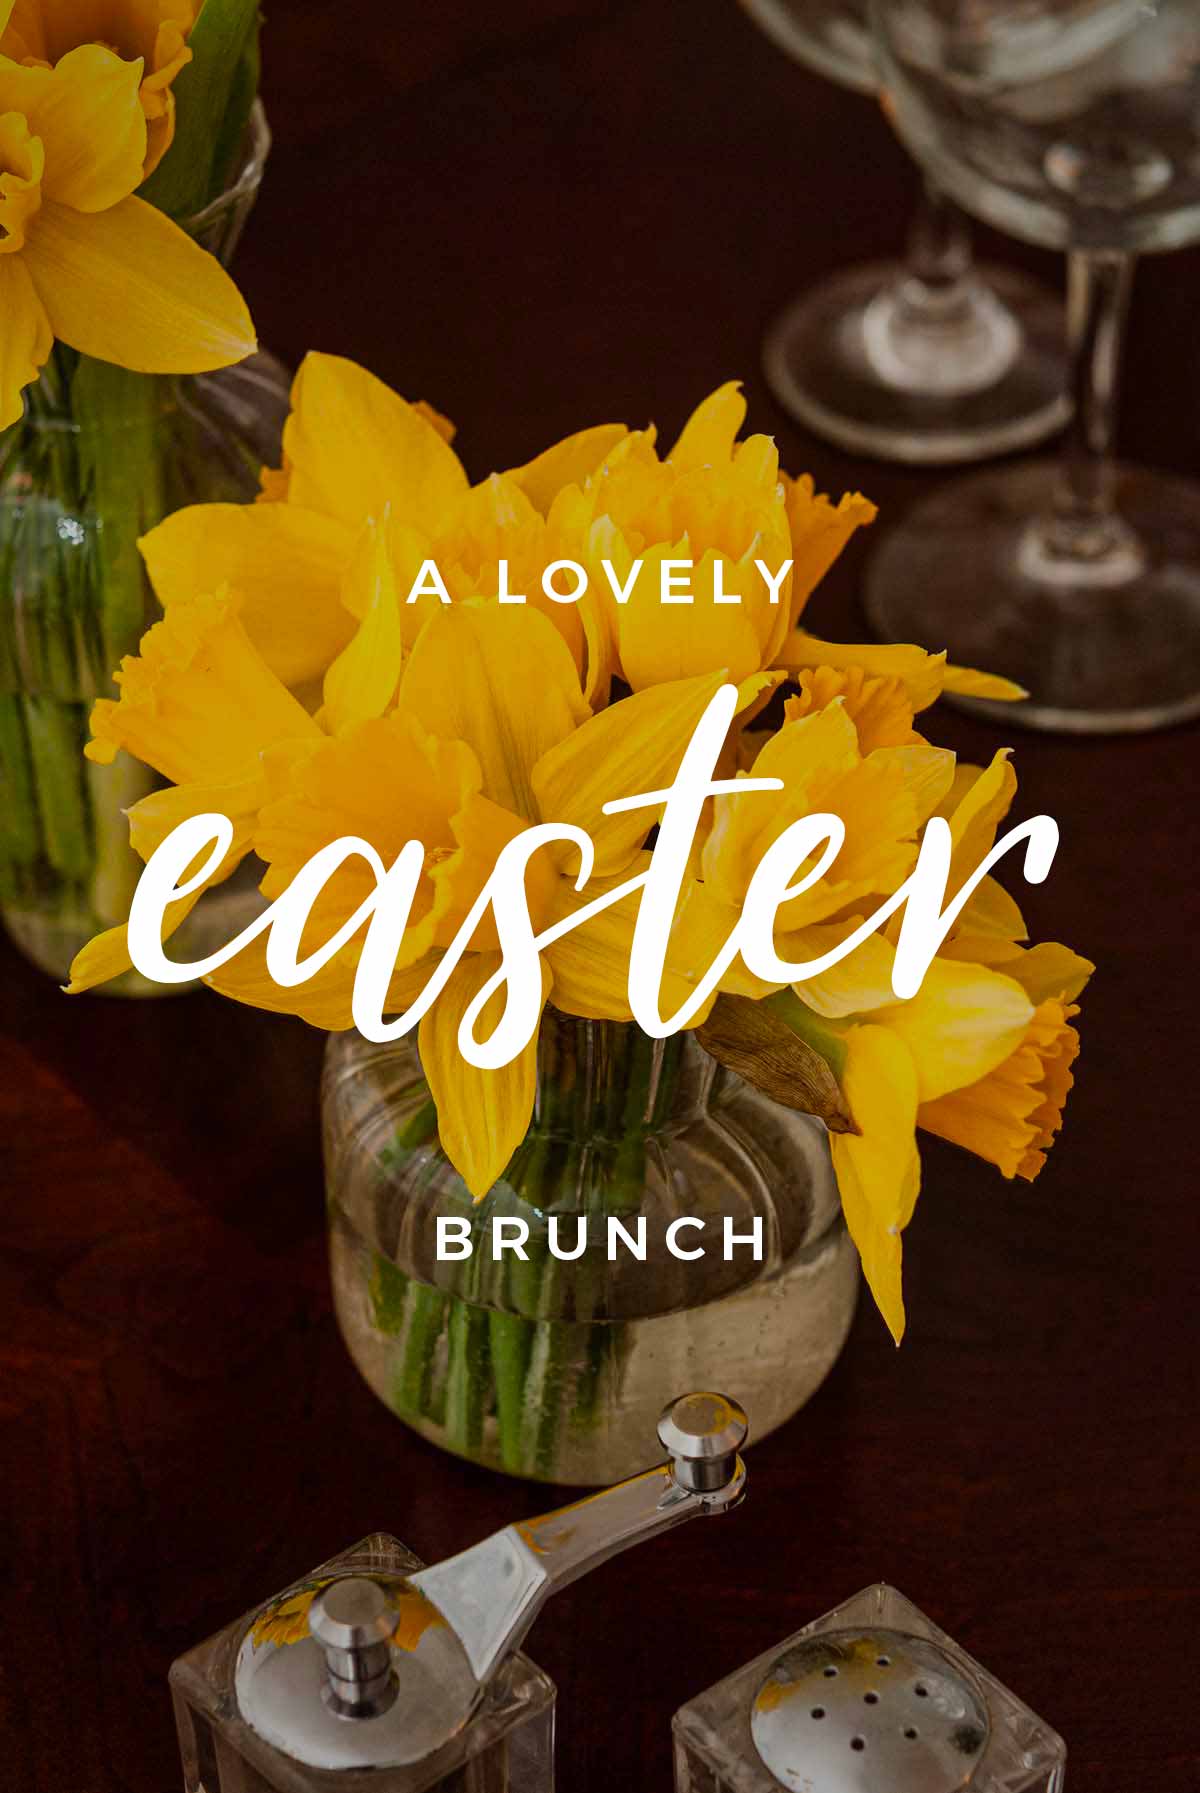 A flower arrangement in a glass jar with a title that says "A Lovely Easter brunch."